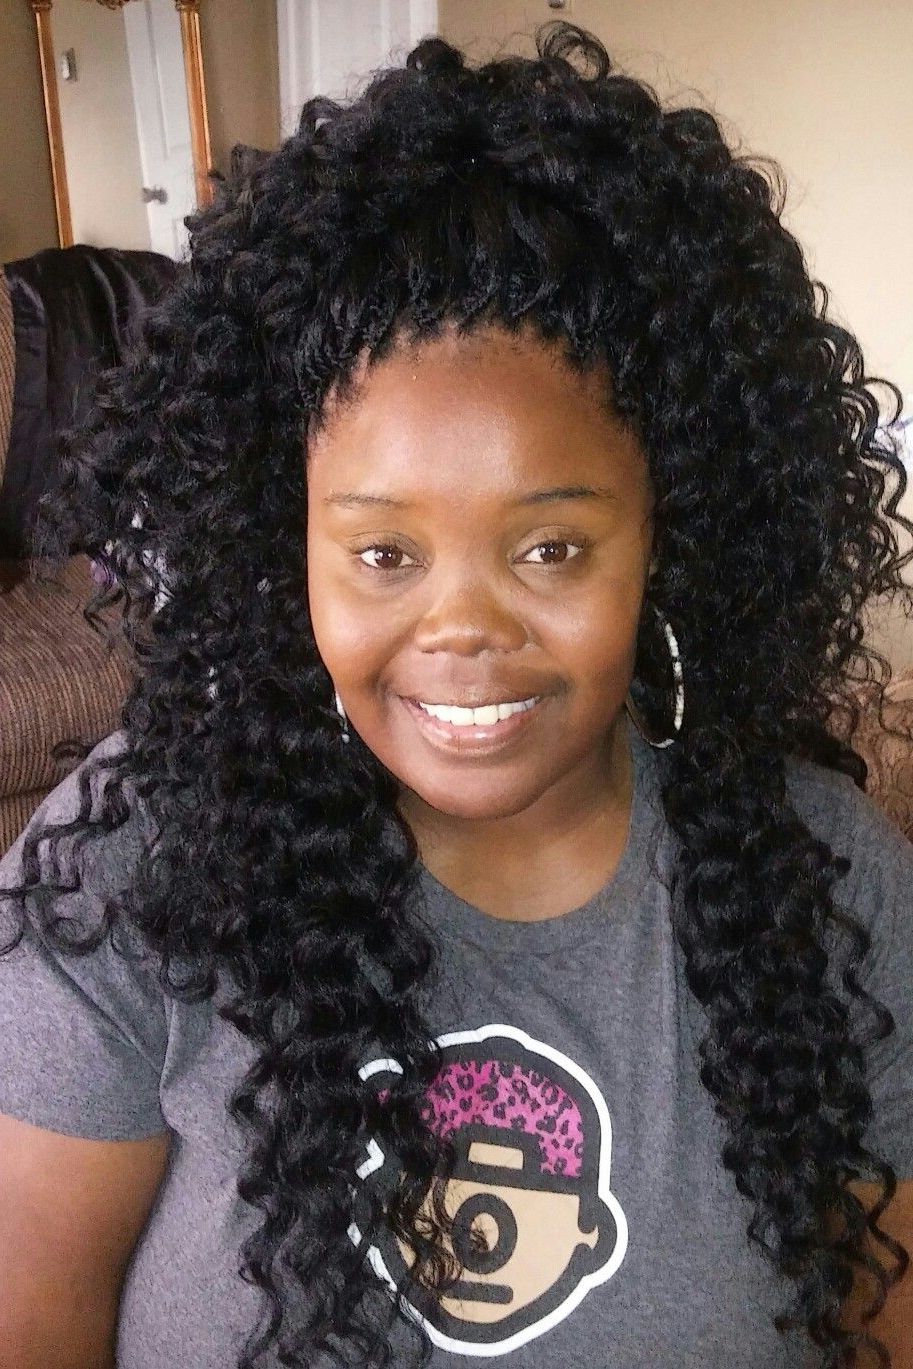 Braids, Micro Braids Styles, African Throughout Most Recent Curly Crochet Micro Braid Hairstyles (View 8 of 20)